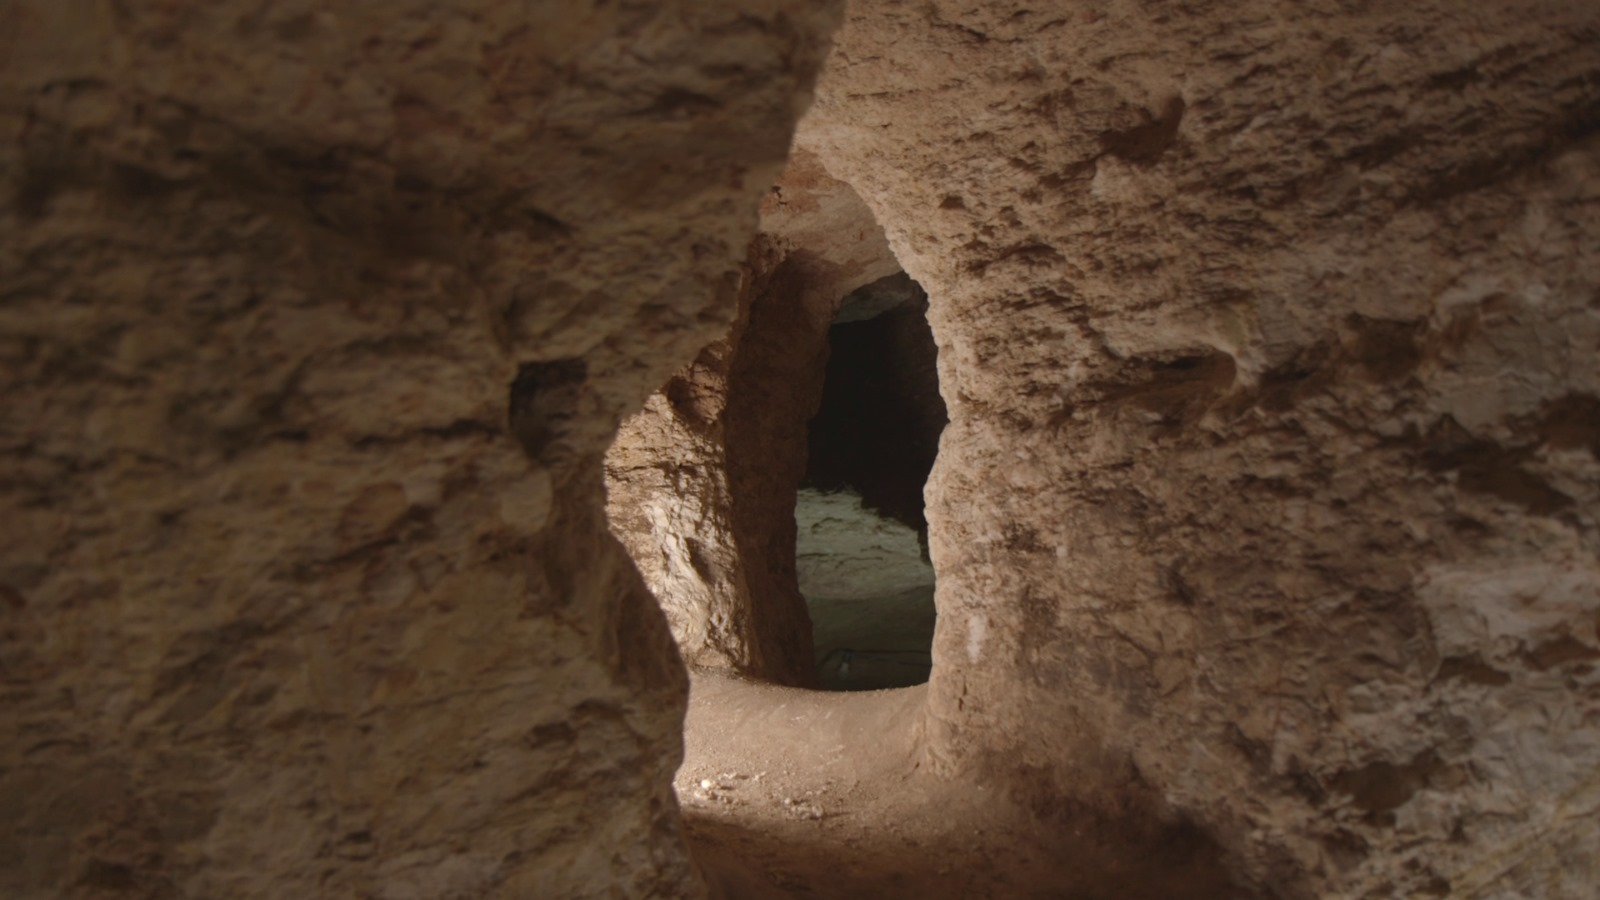 Ancient Jewish revolt-era ‘safe rooms’ revealed in the Galilee